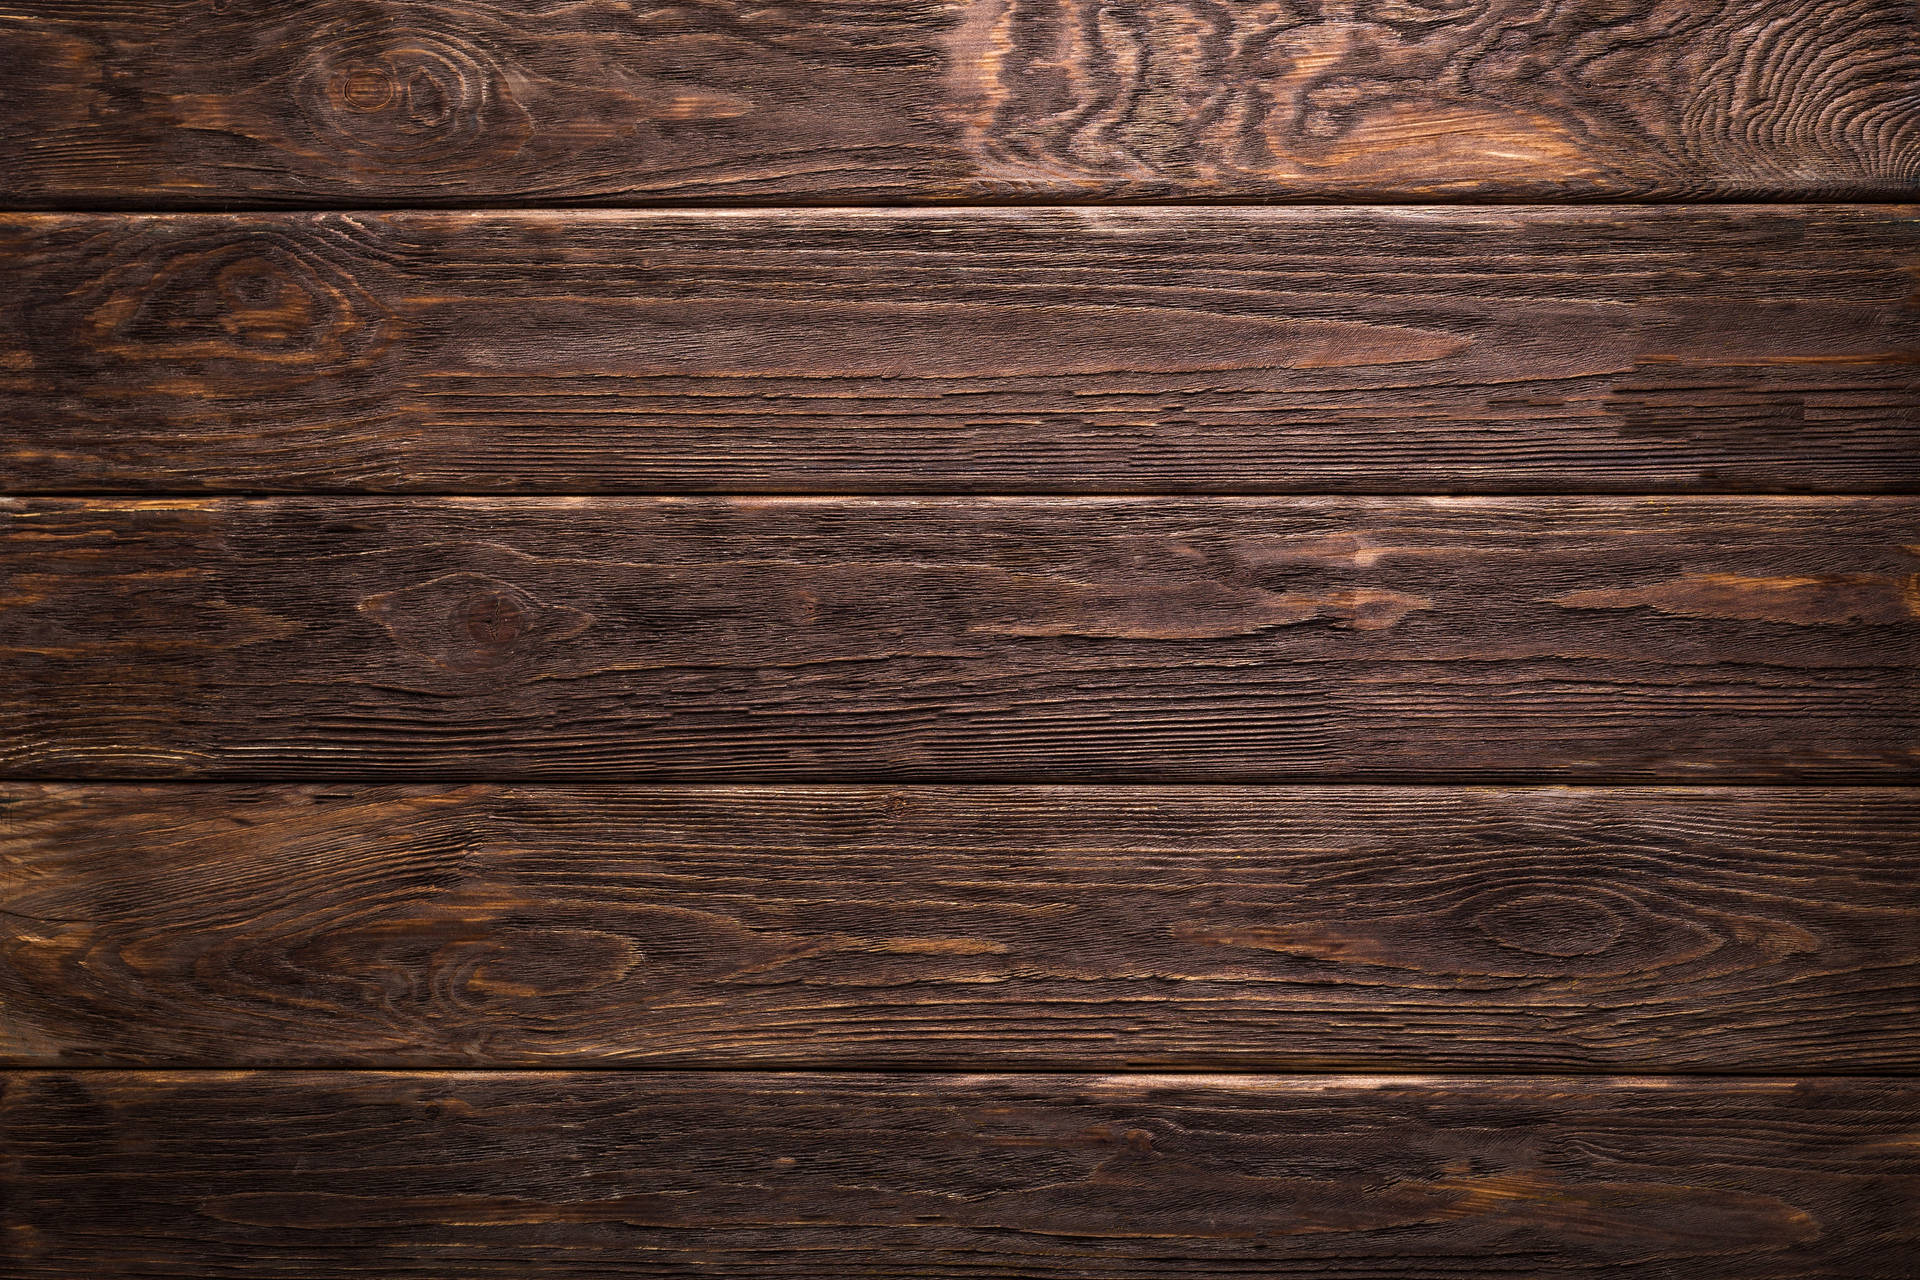 Wood 5356X3571 Wallpaper and Background Image